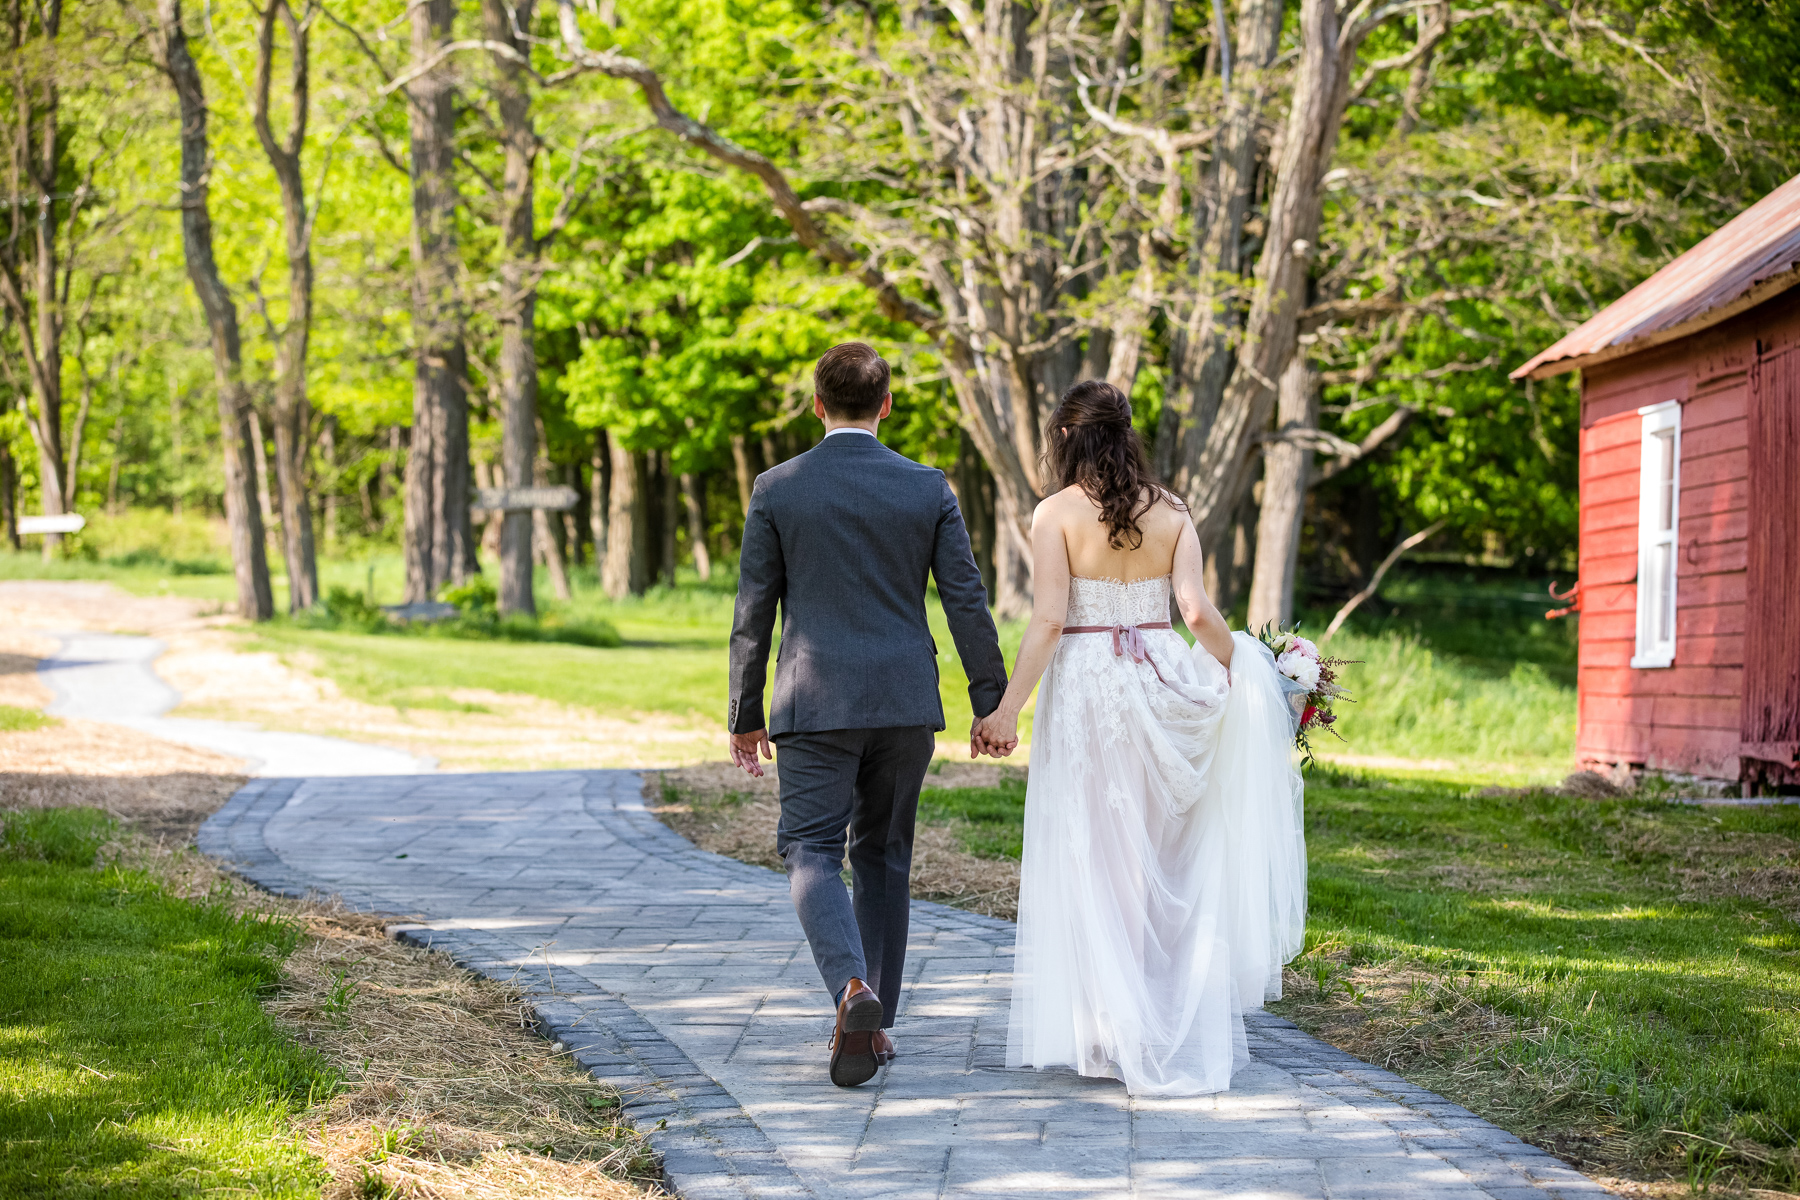 The bride and groom taking a walk on the property at Blenheim Hill Farm, holding hands and looking happy